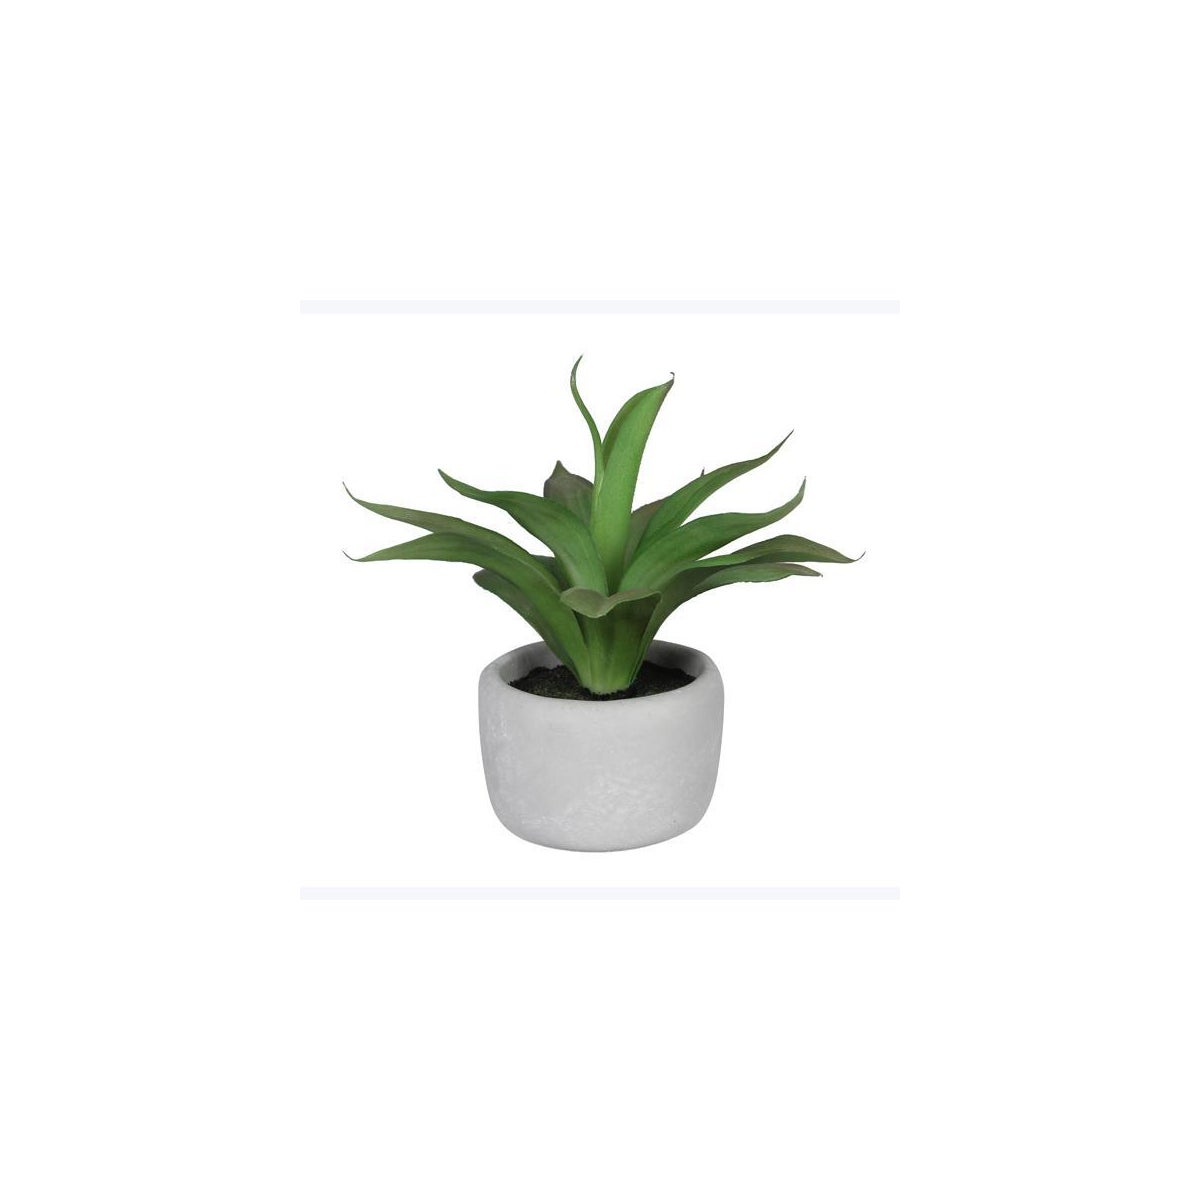 Artificial Agave in Cement Pot